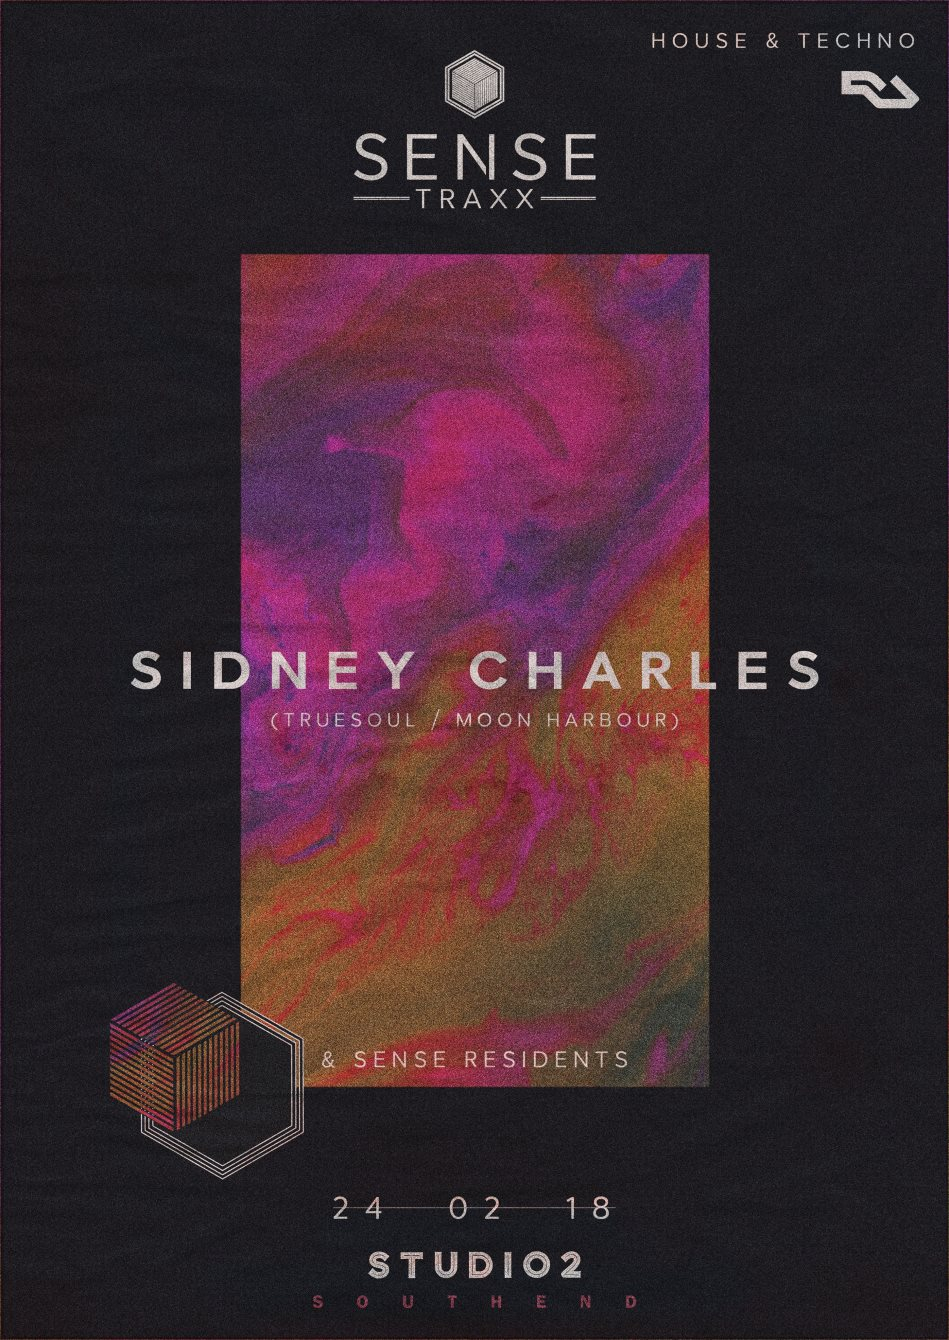 Sense Traxx with Sidney Charles - Flyer front